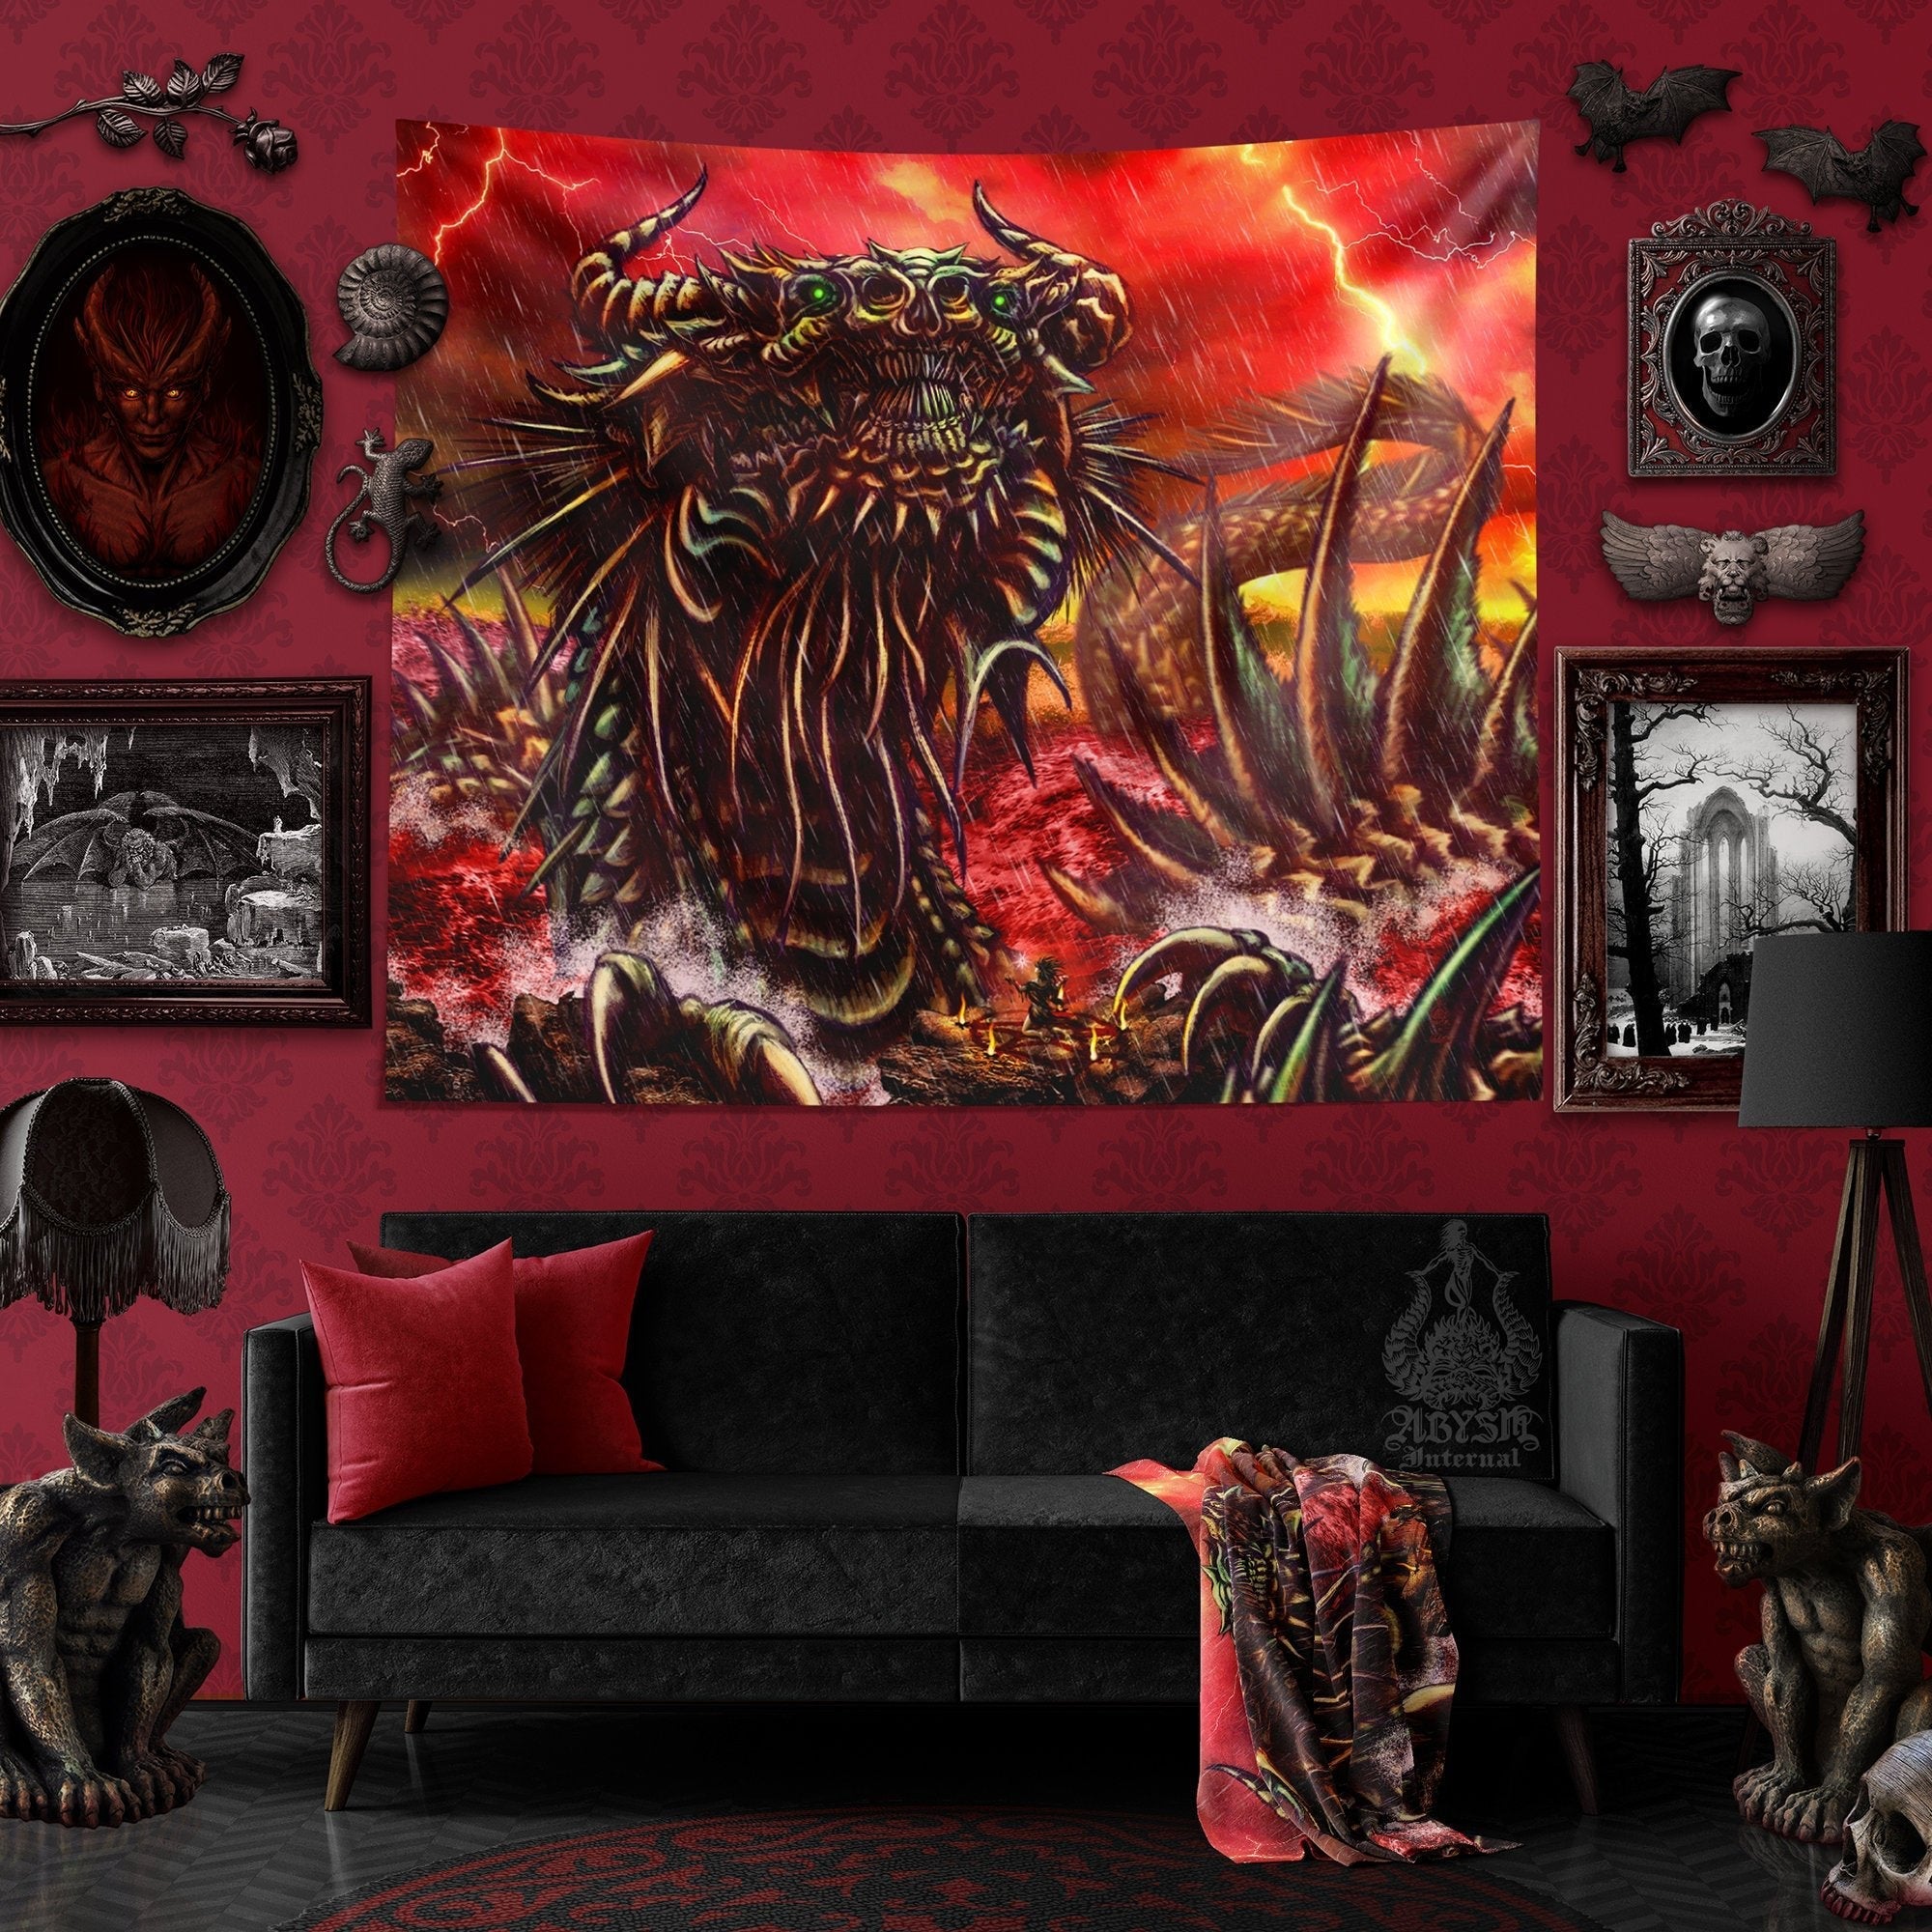 Red Dragon Fantasy hole in the Wall Art Sticker Quality Bedroom Decal Print